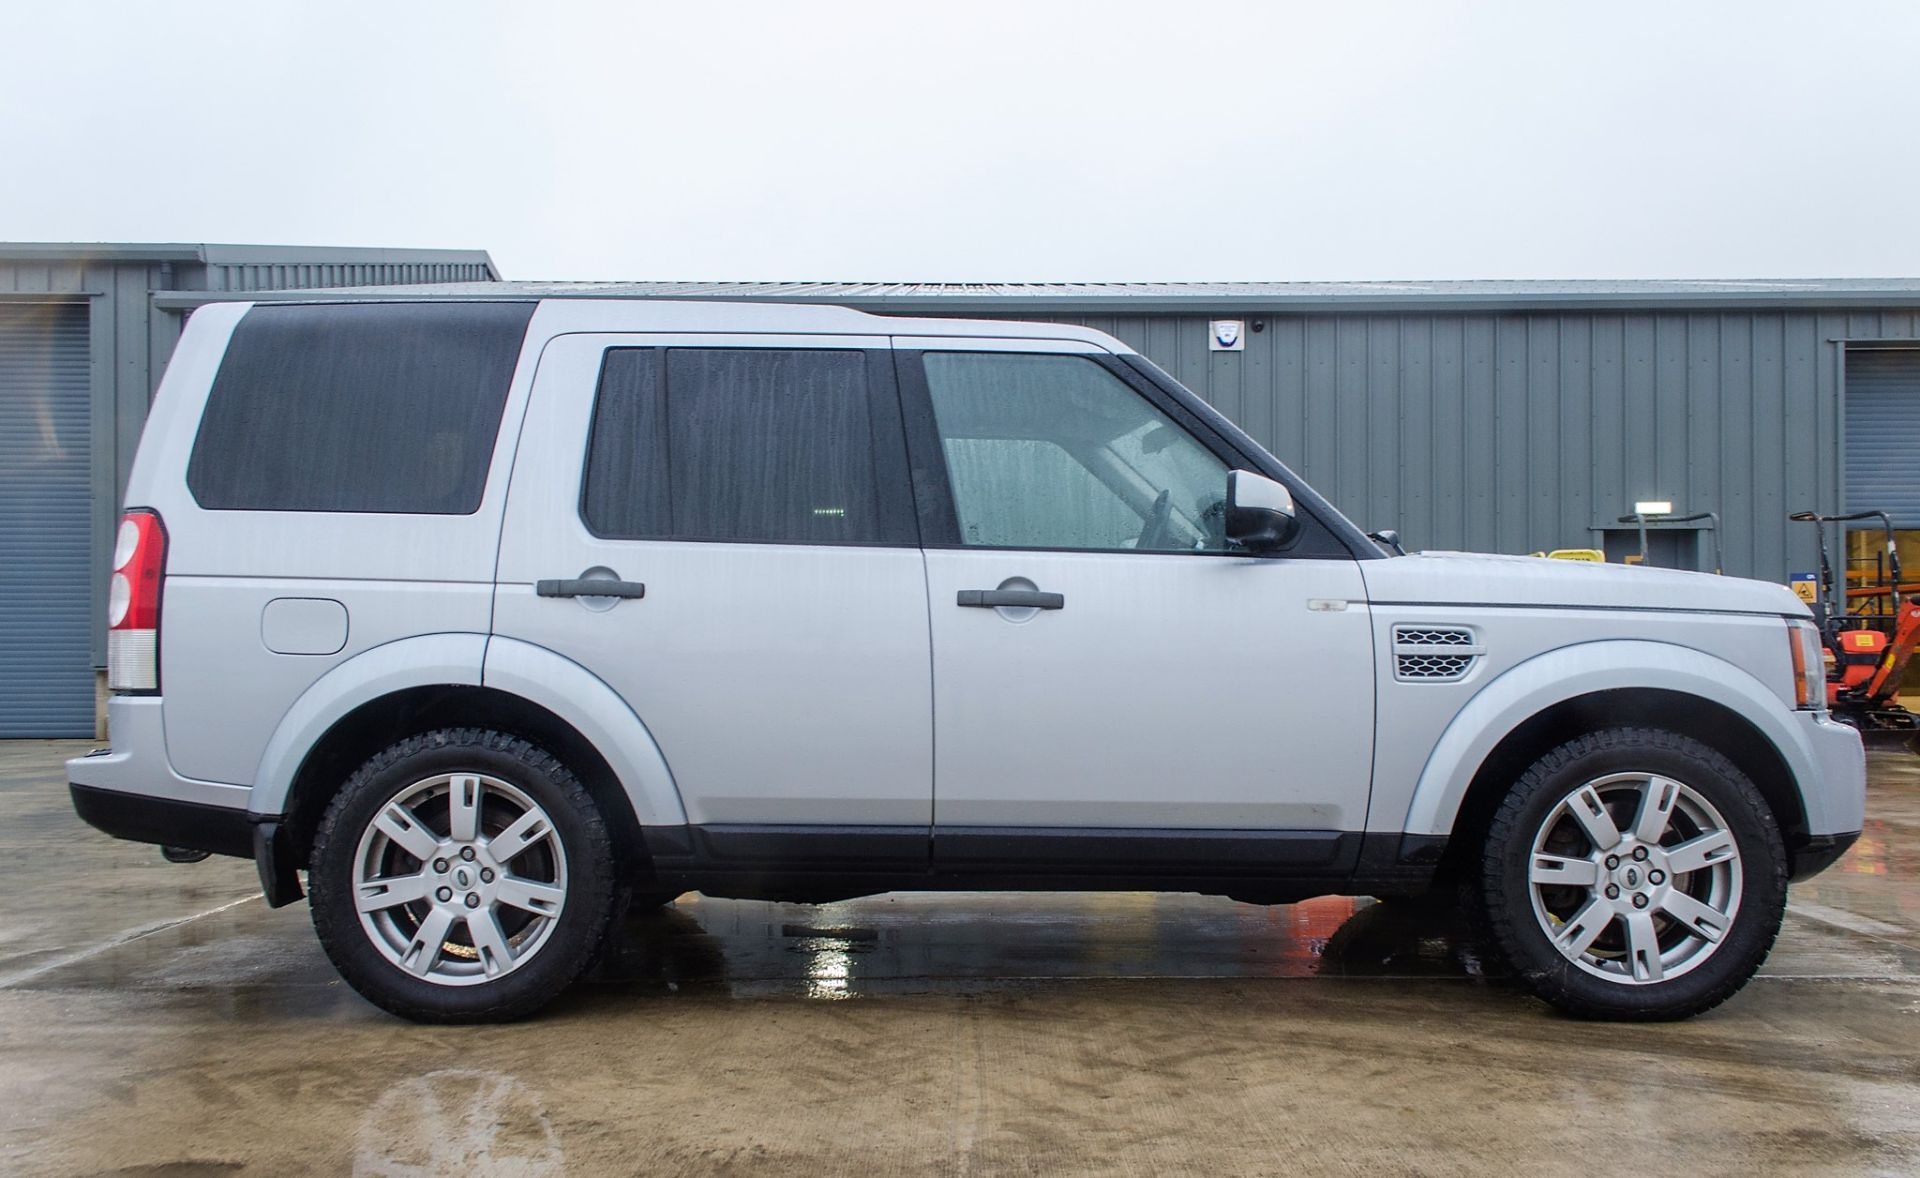 Land Rover Discovery 4 GS 3.0 TDV6 auto 5 door 4wd estate car  Registration Number: OE 11 RYH - Image 8 of 28